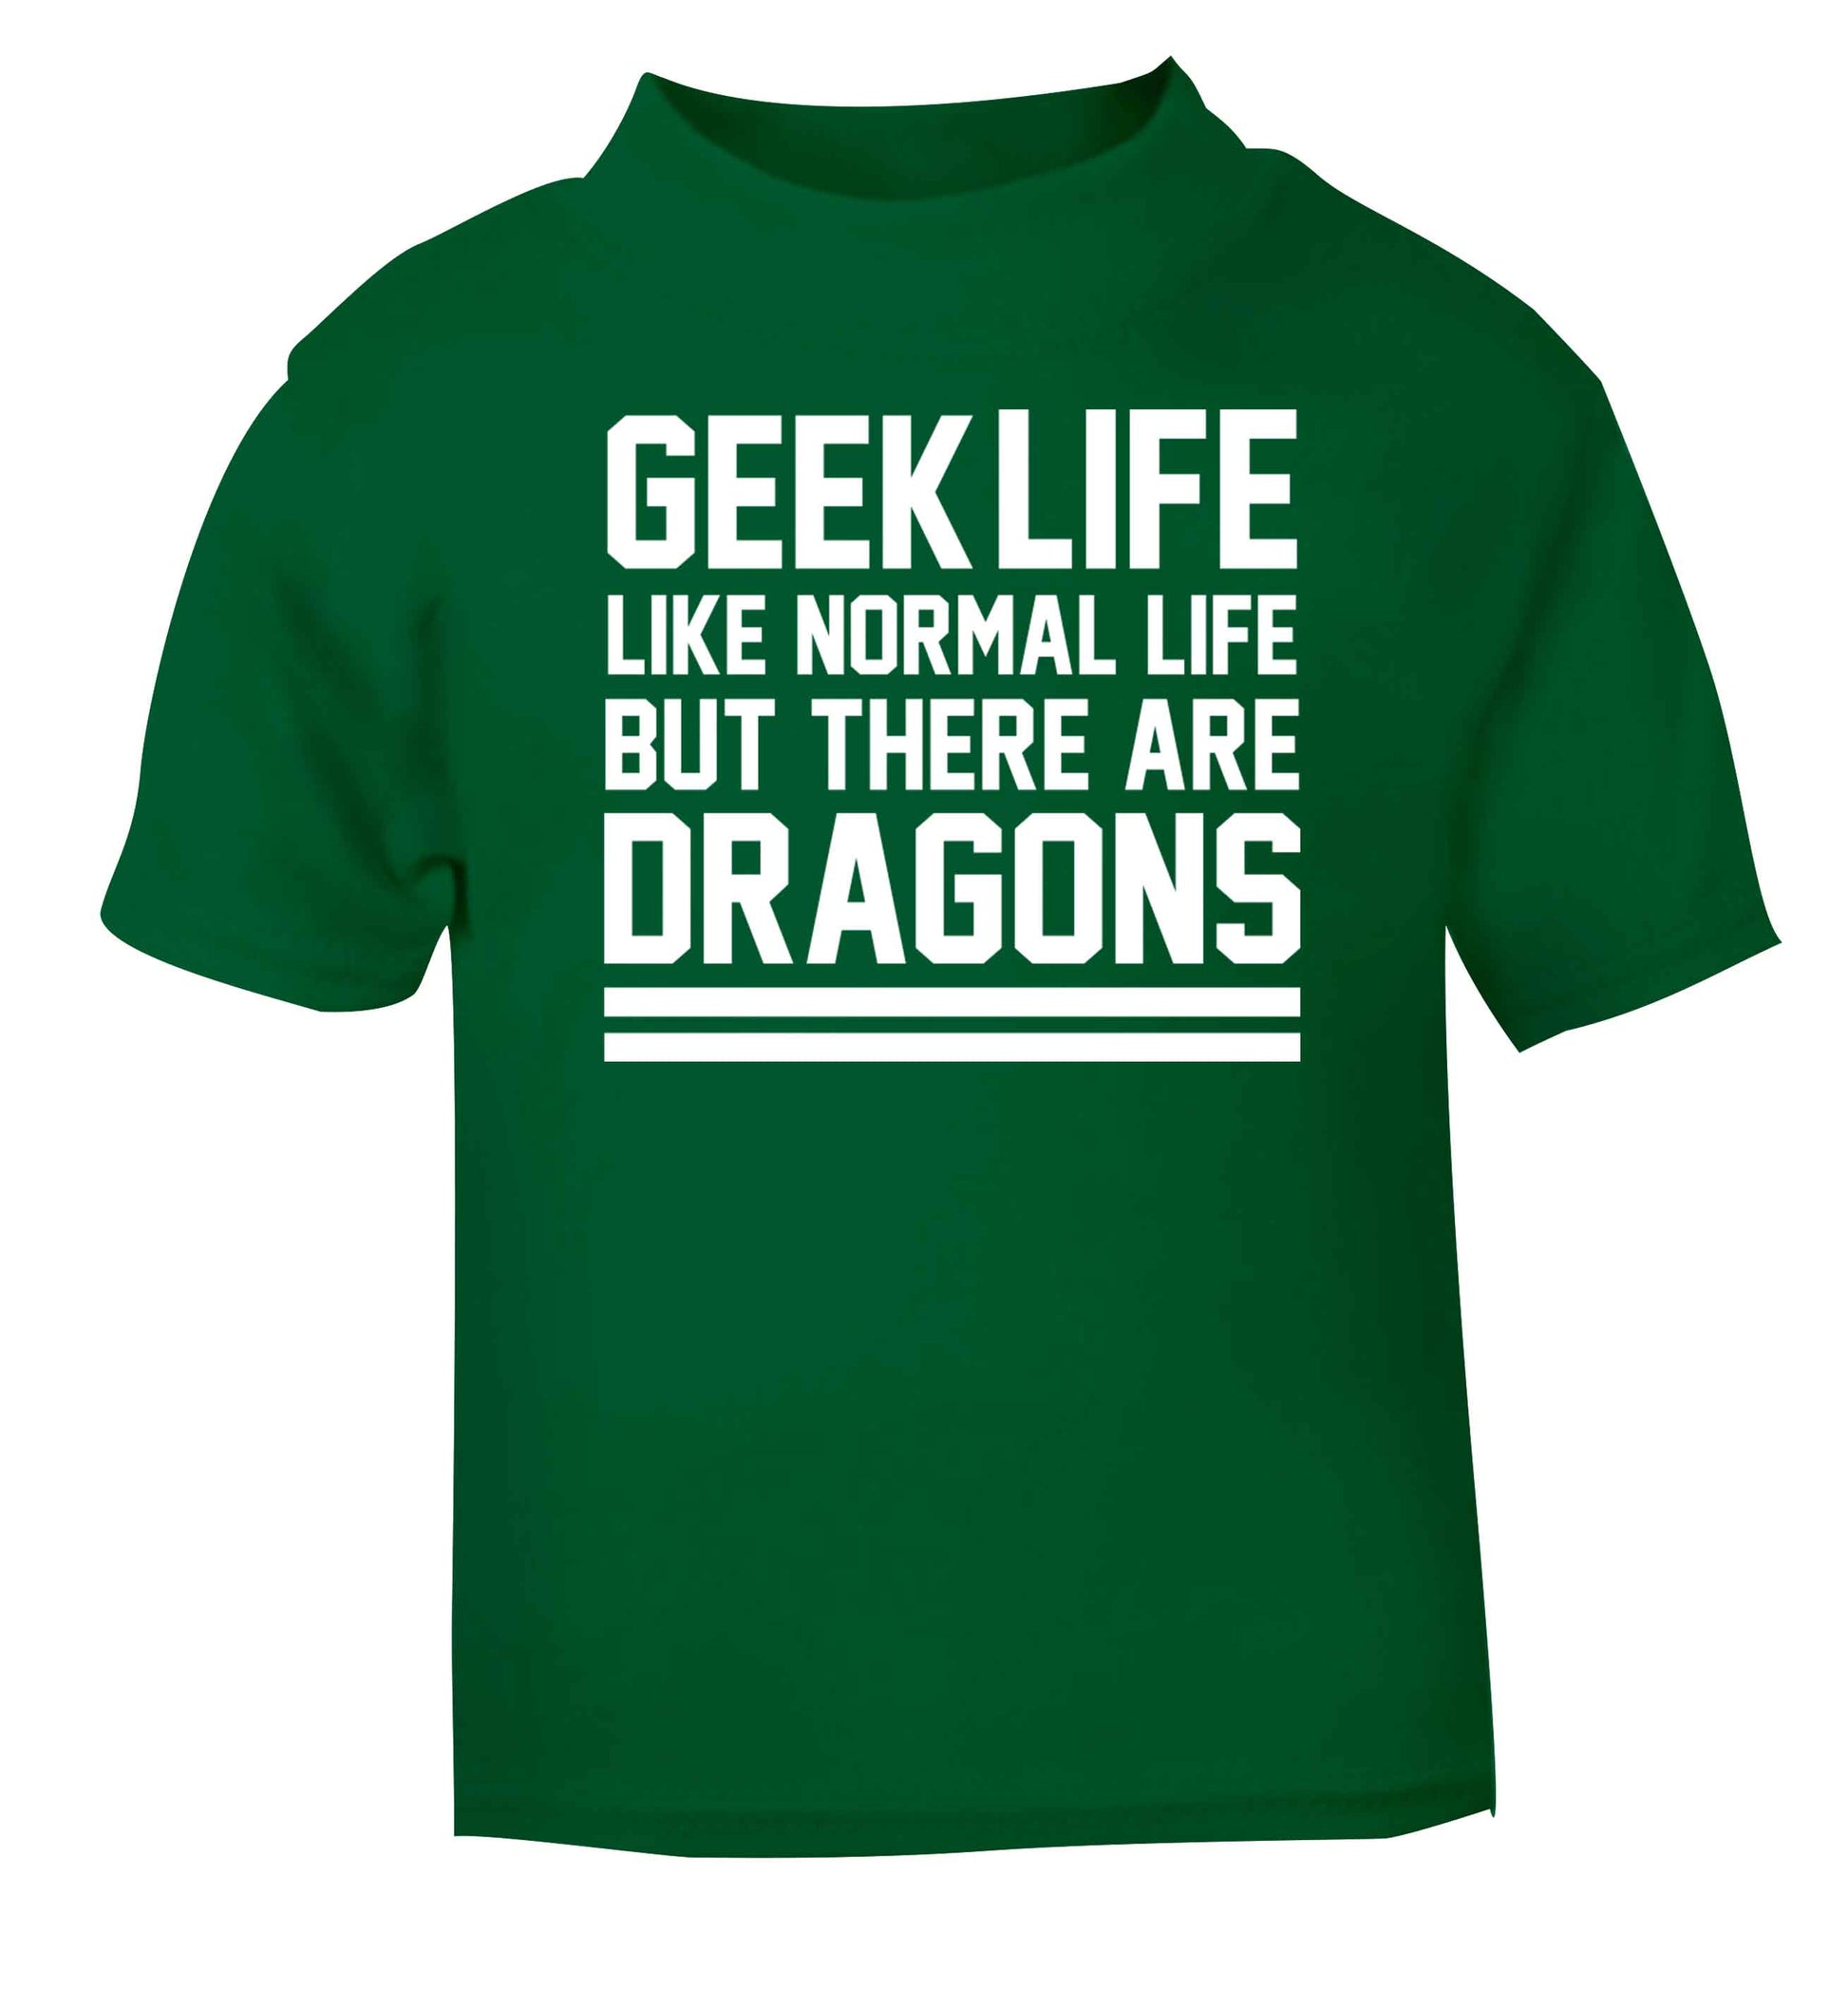 Geek life like normal life but there are dragons green baby toddler Tshirt 2 Years